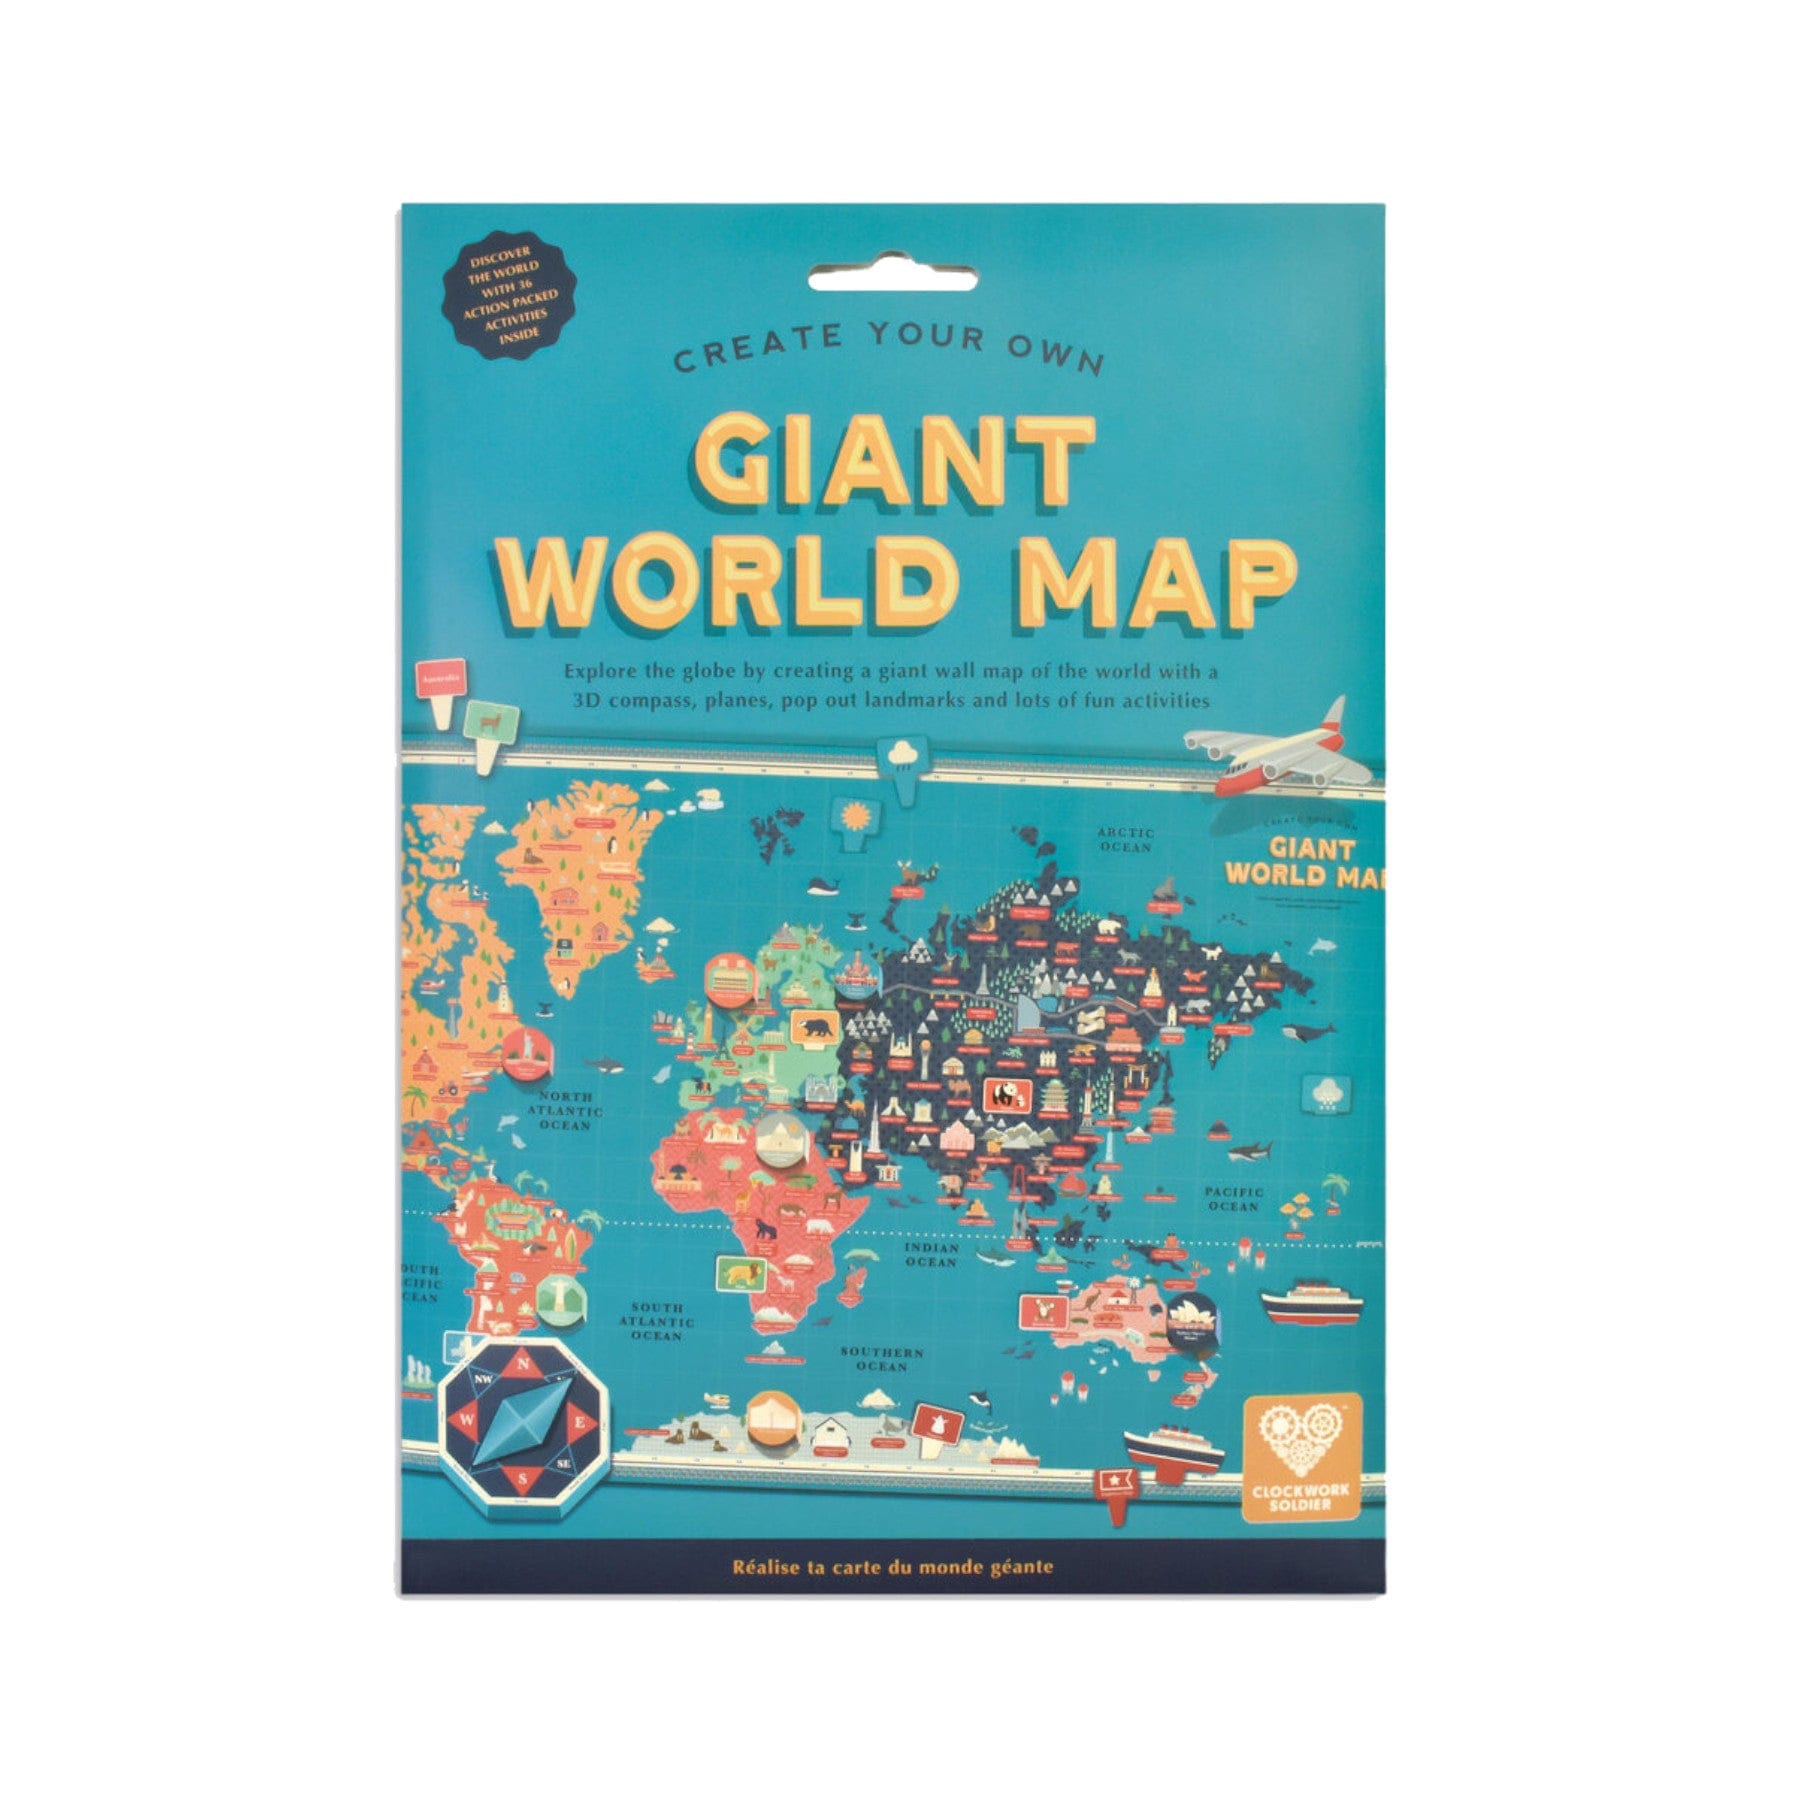 Create Your Own Giant World Map product packaging with educational activity kit for children featuring colorful world map with pop-out landmarks and 3D compass